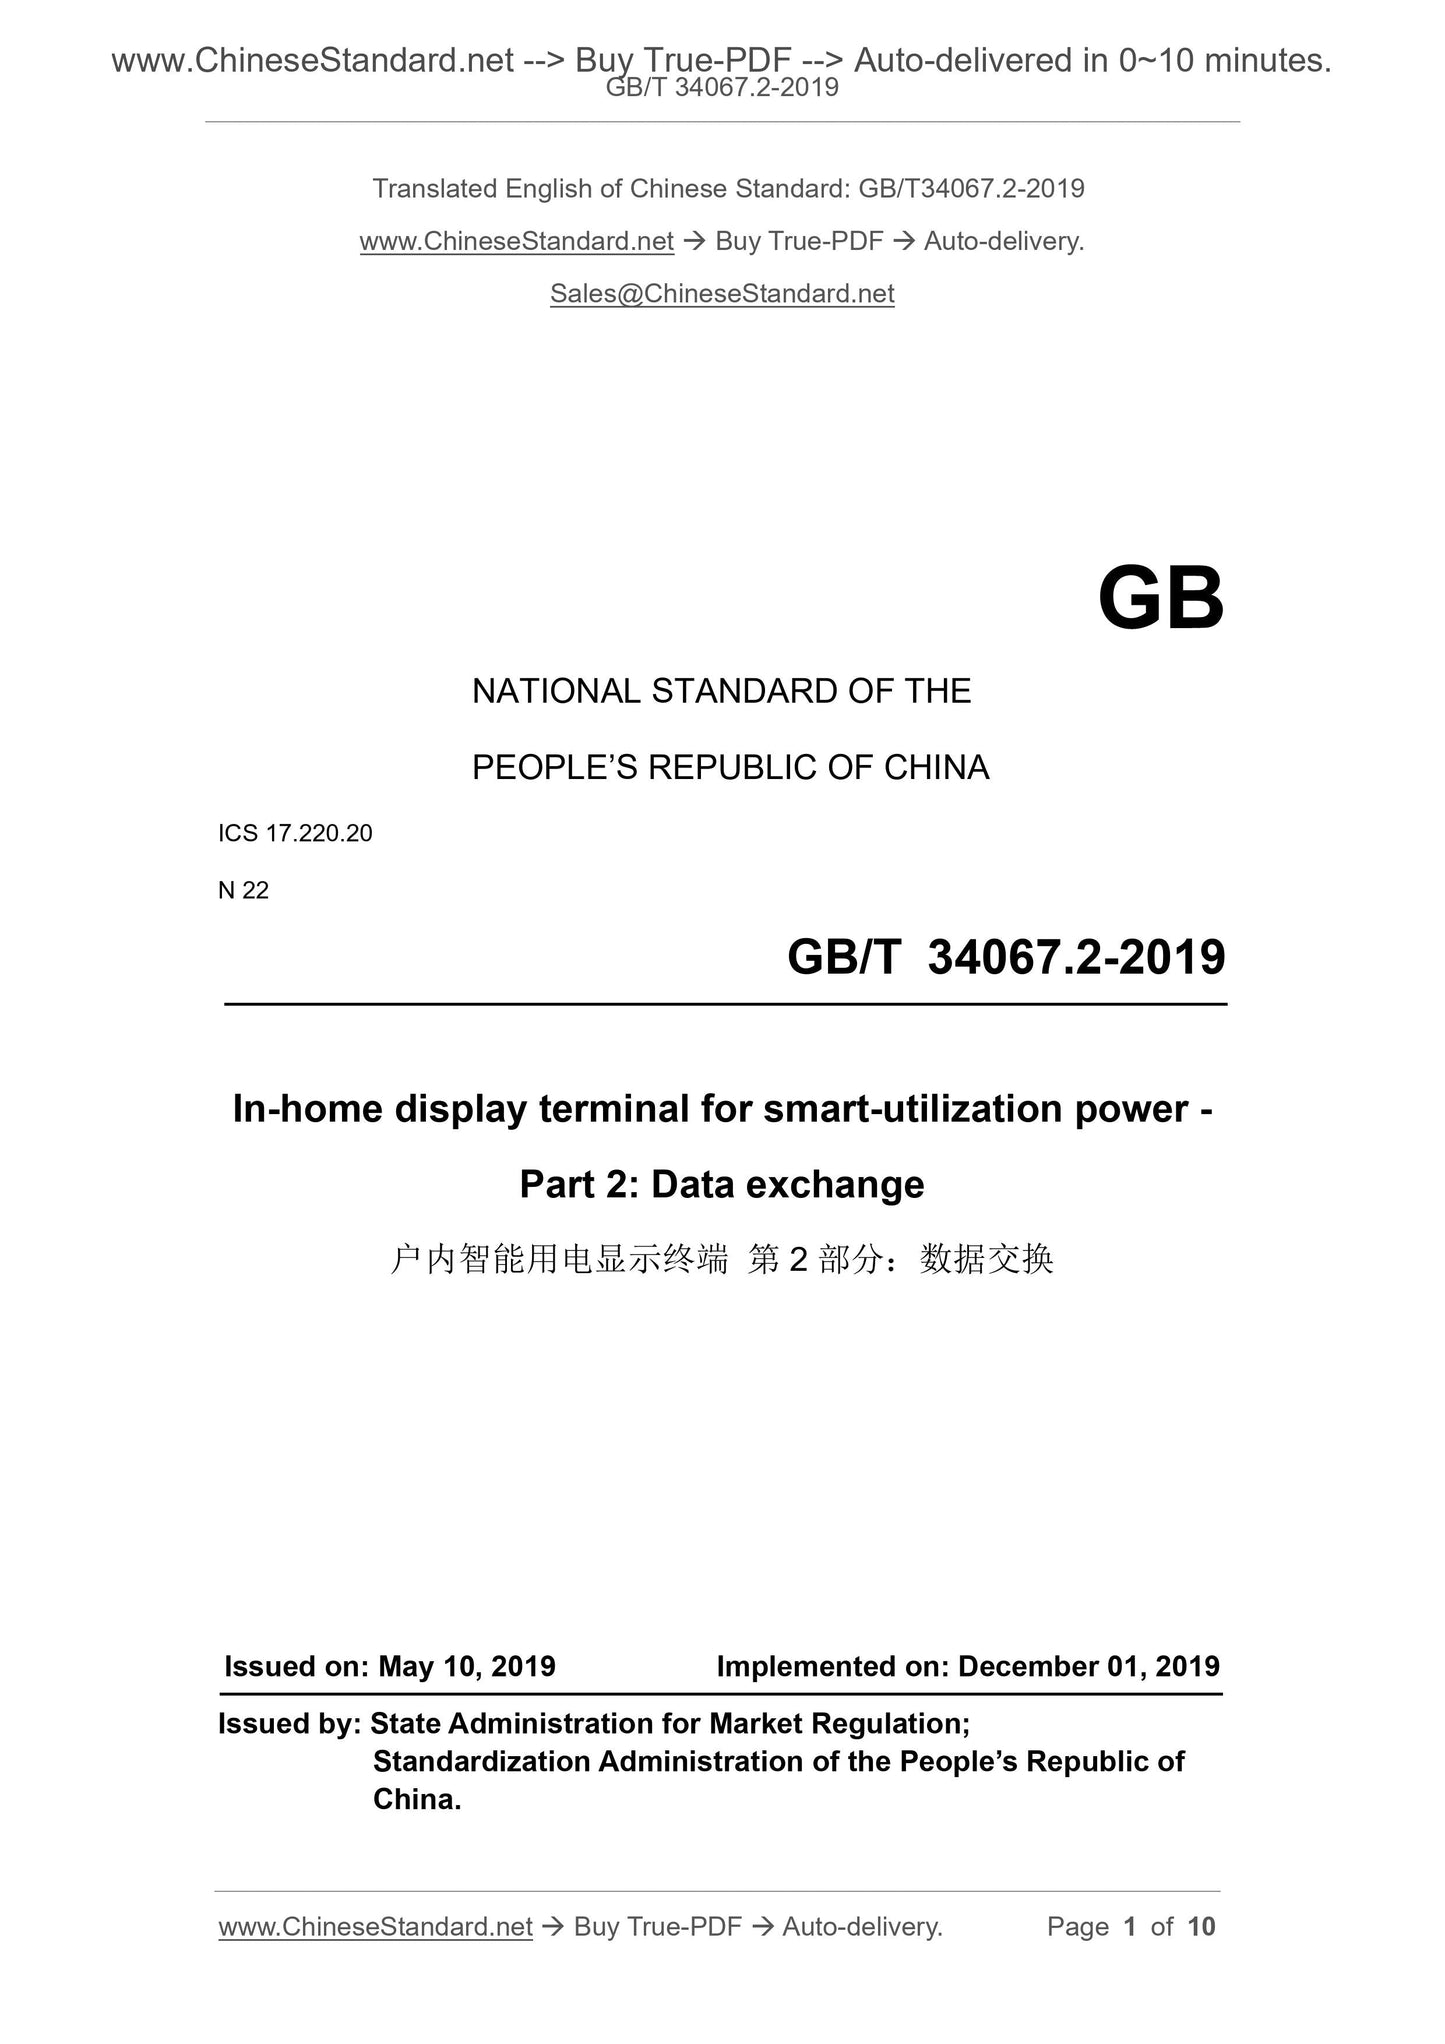 GB/T 34067.2-2019 Page 1